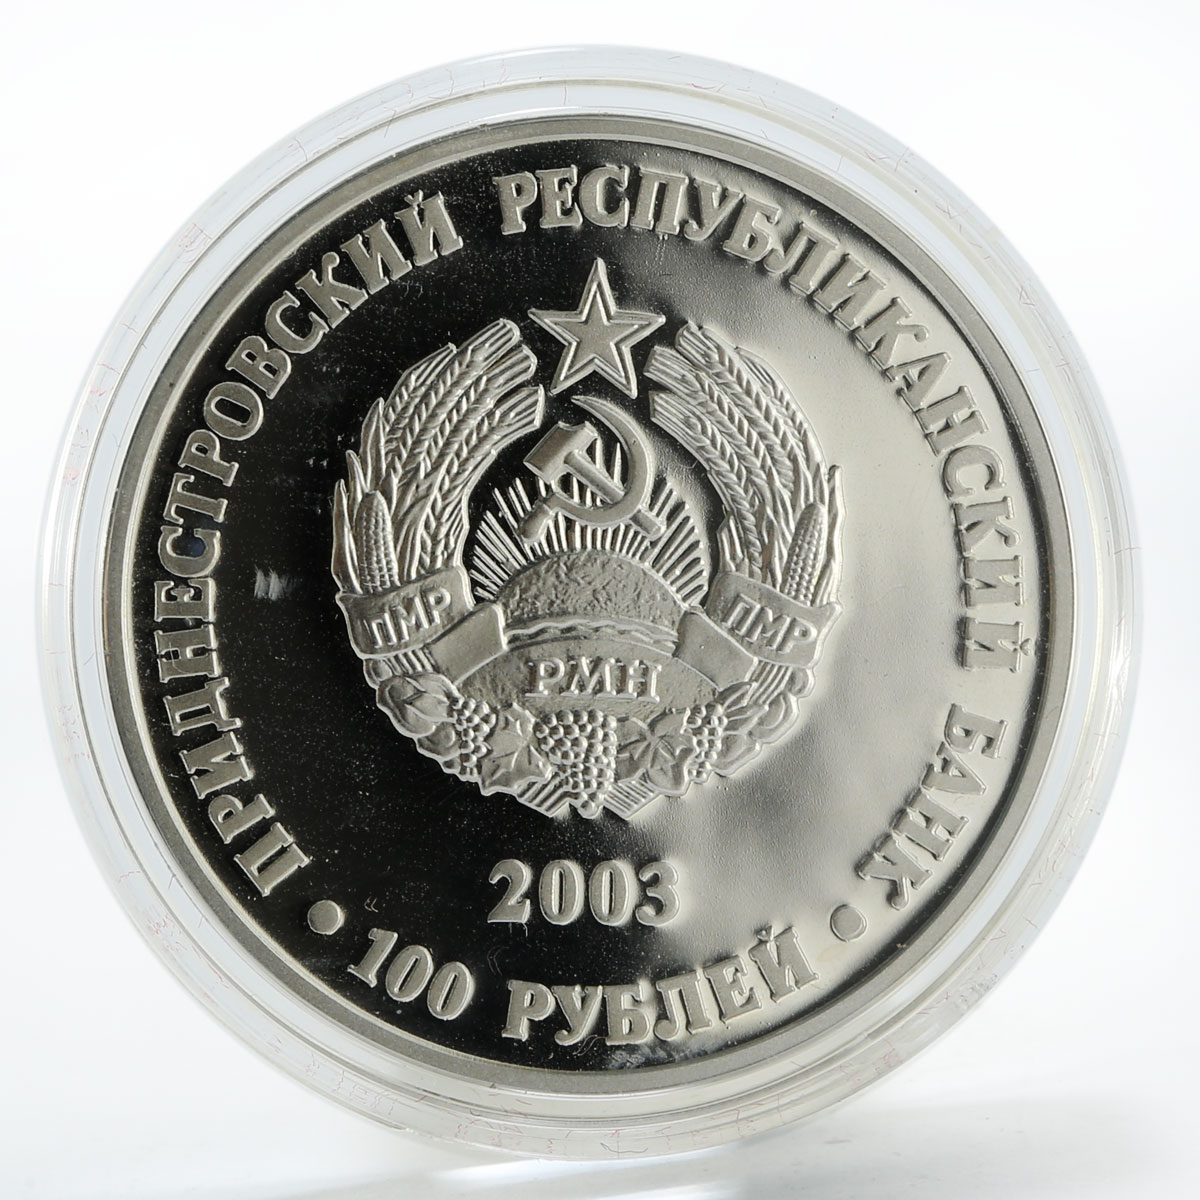 Transnistria 100 rubles The Hoopoe bird proof silver coin 2003